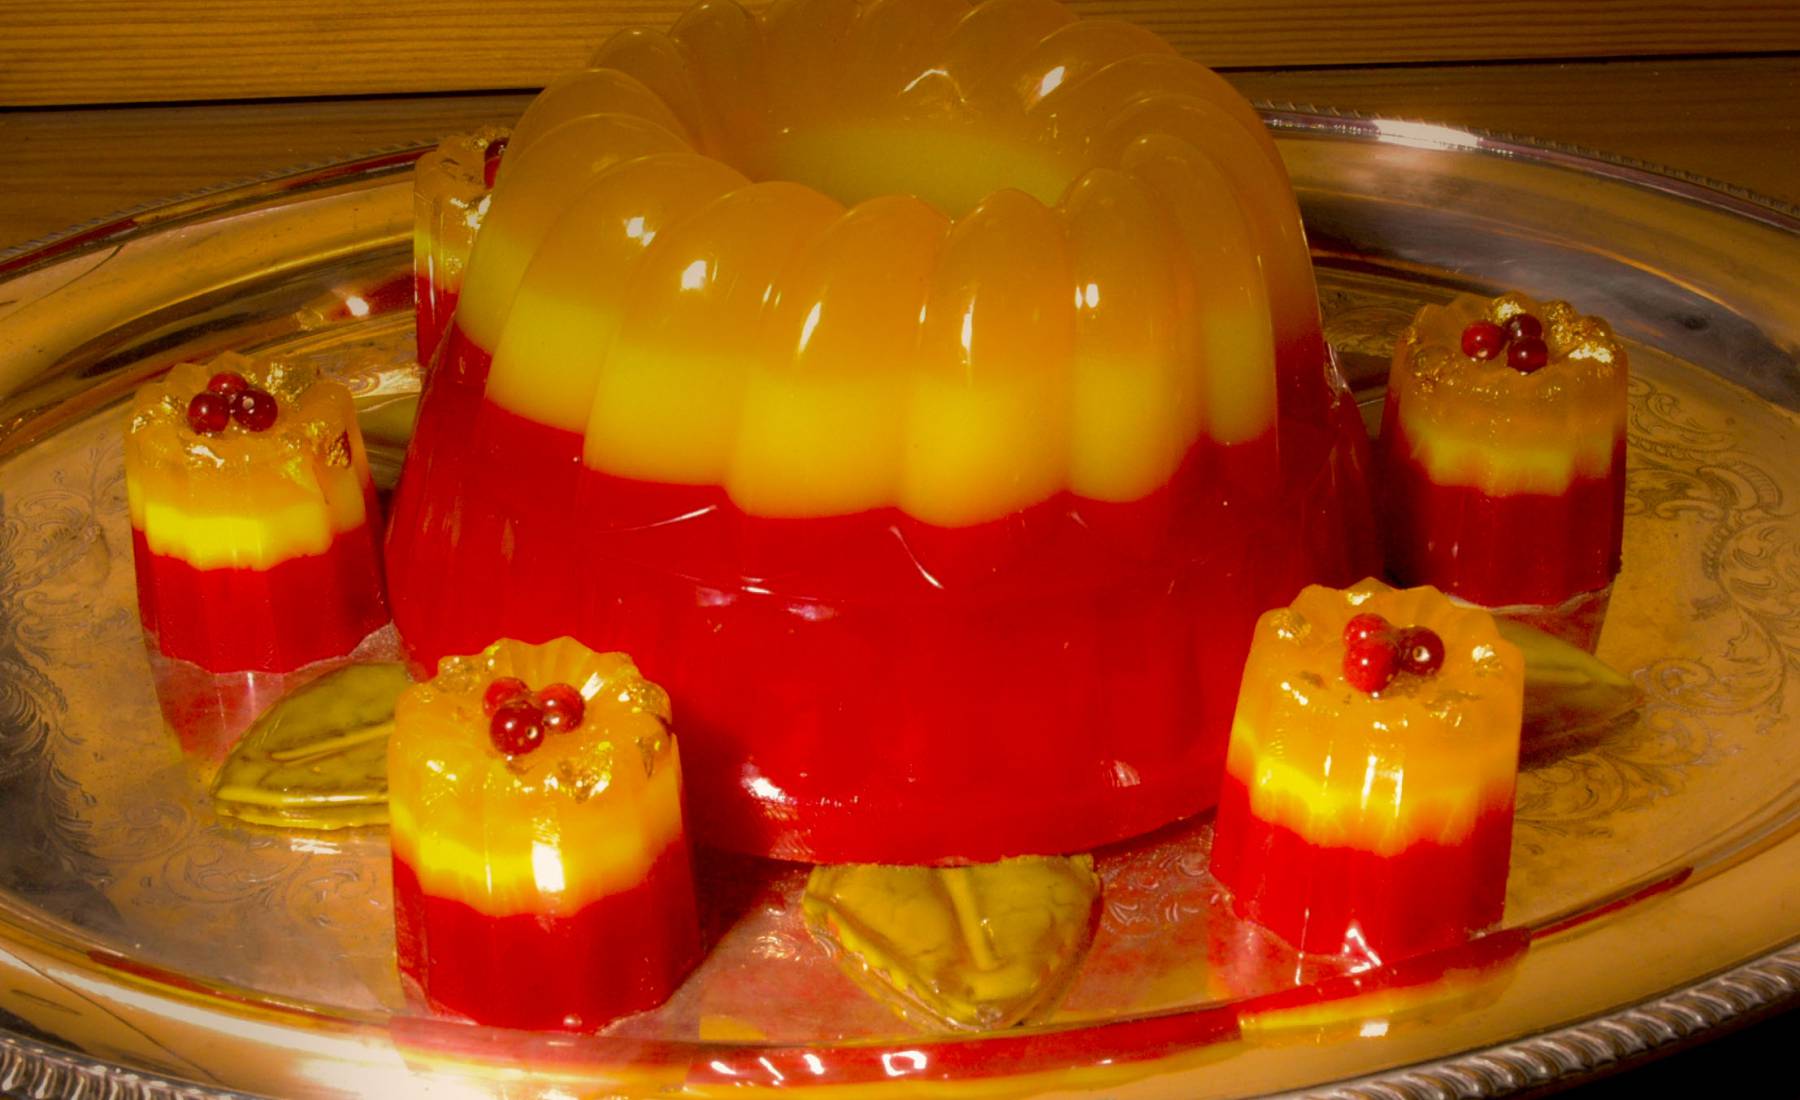 jellies, yellow, red, coloured resin, galley kitchen, s.s. great britain, puddings, banquet, victorian